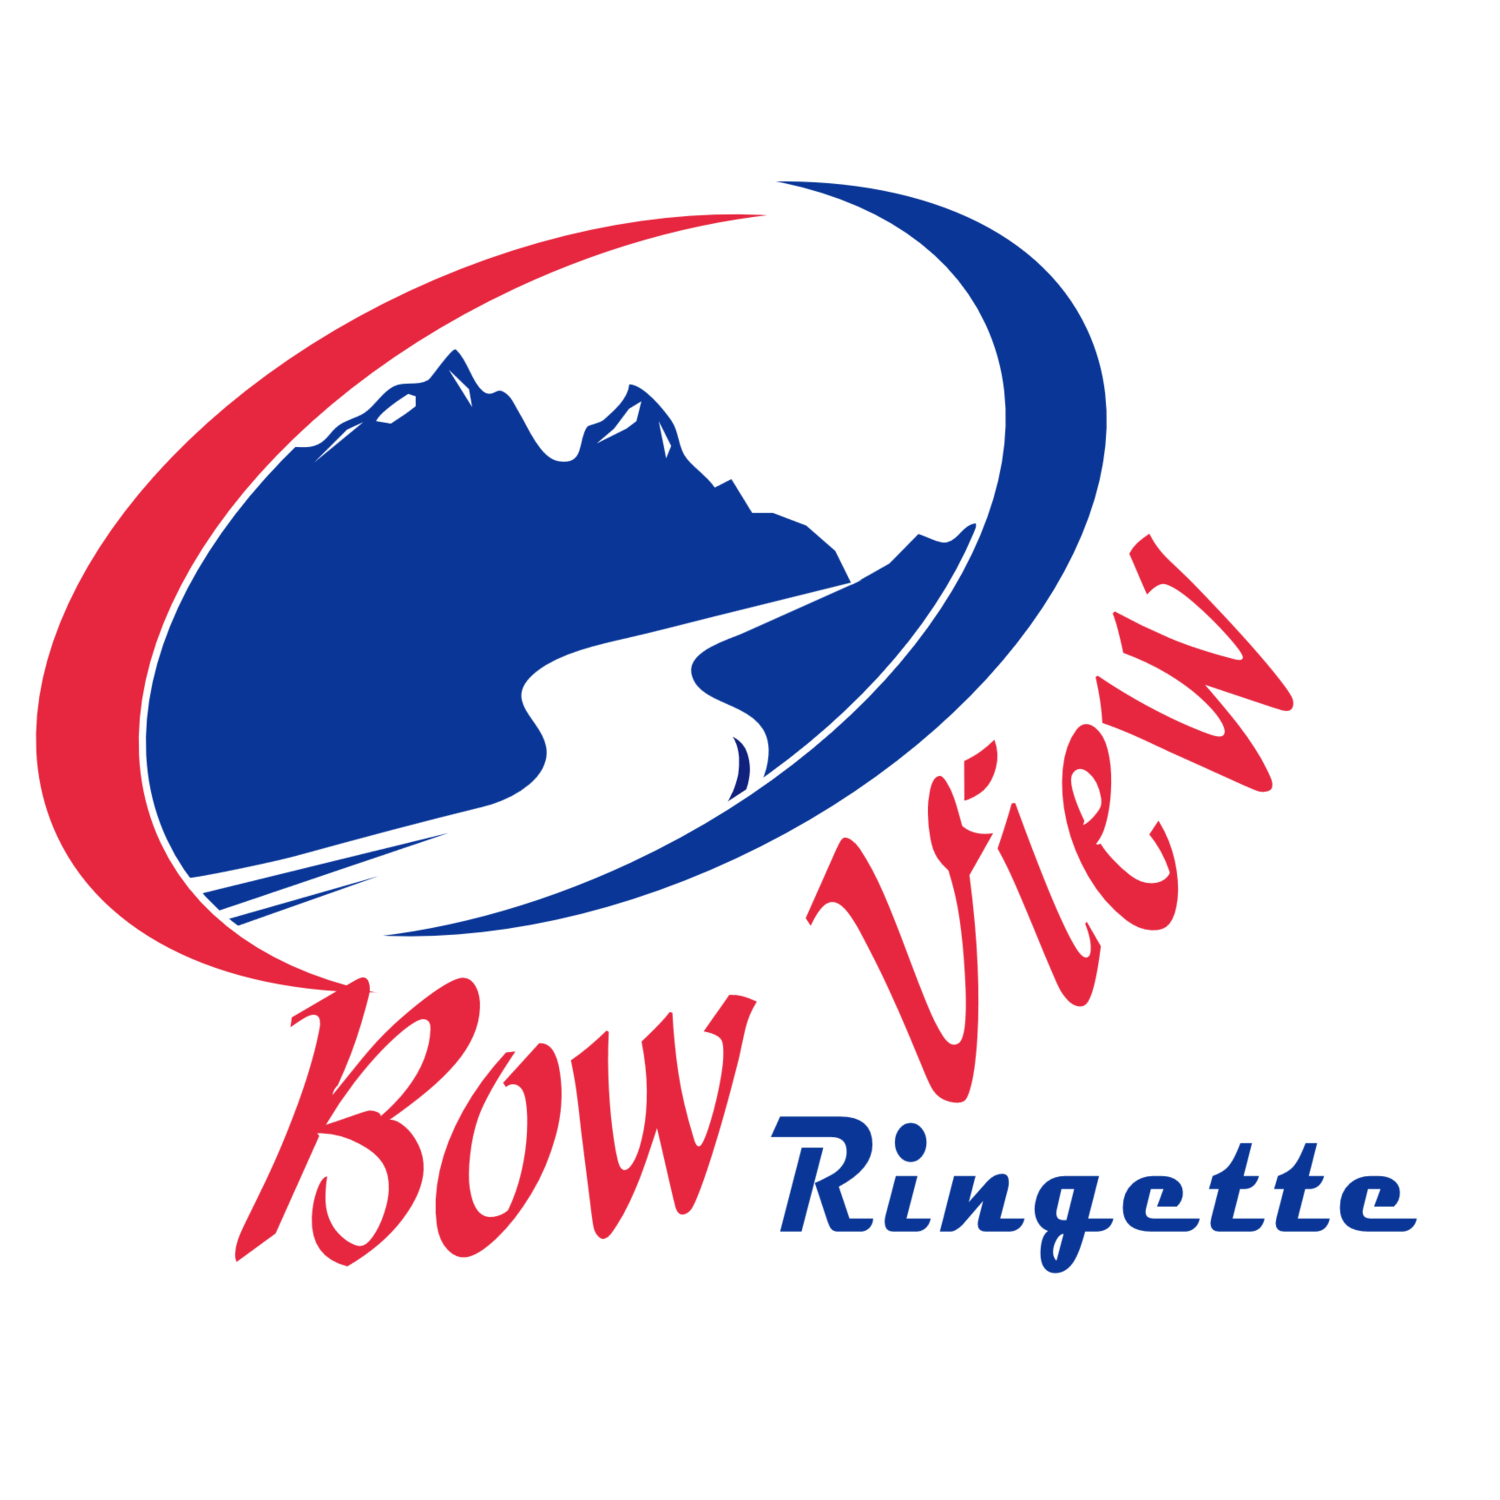 Bow View Ringette